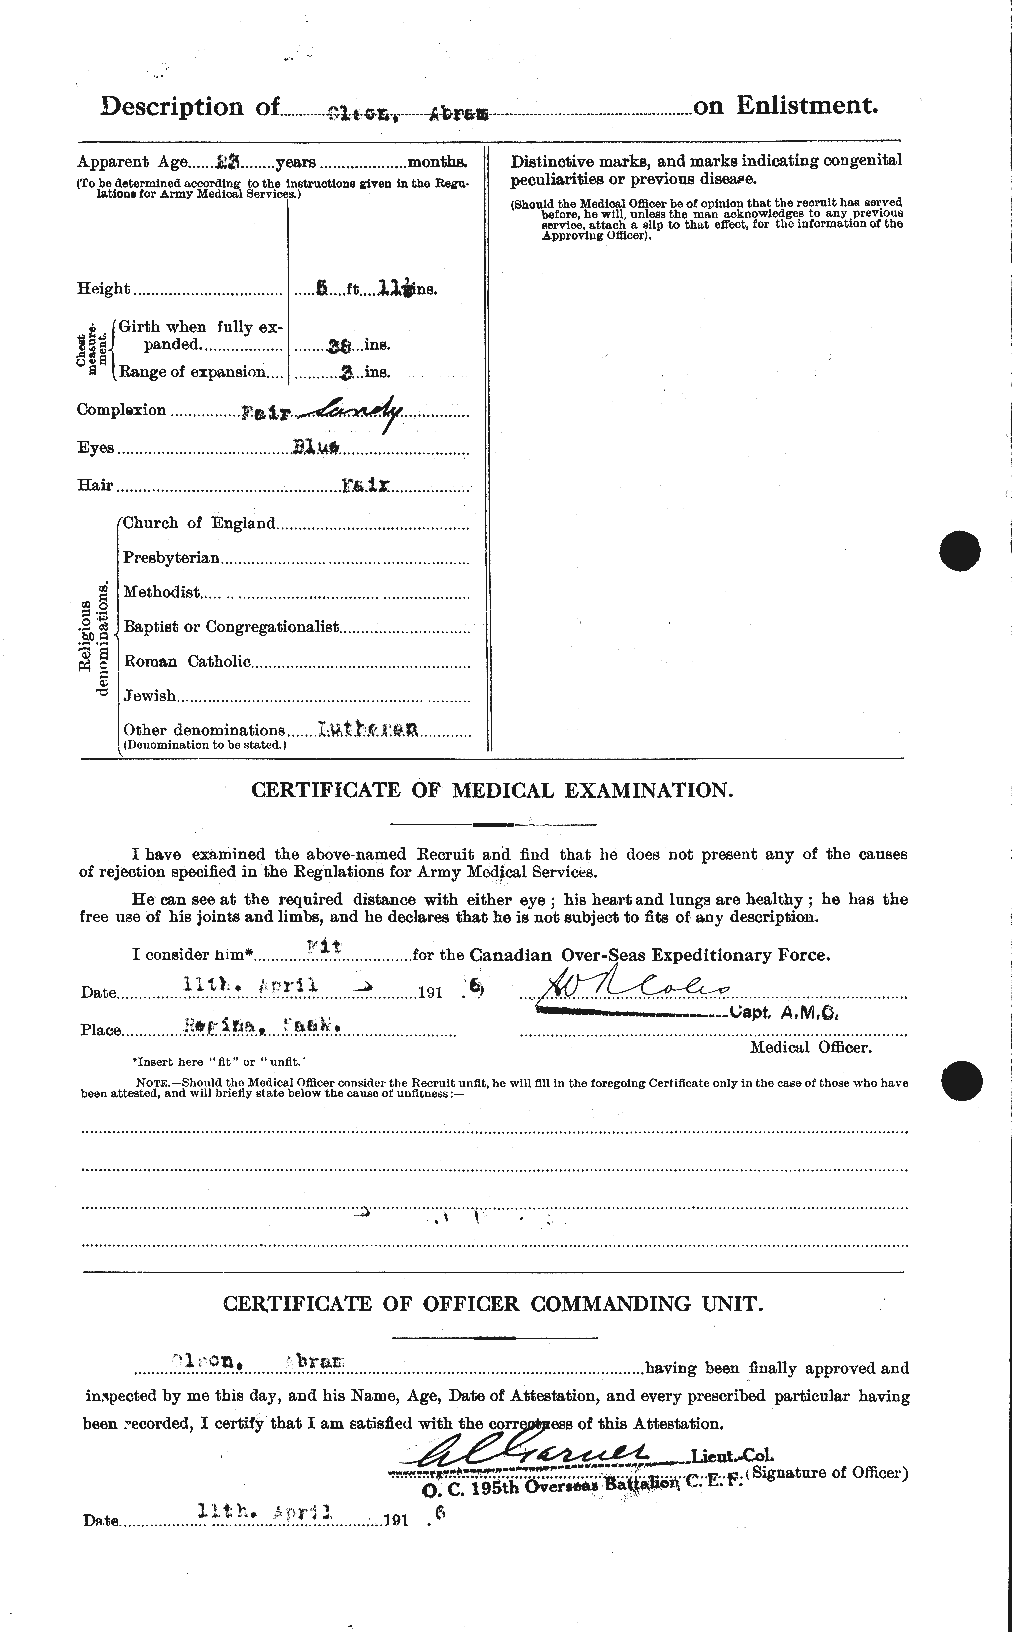 Personnel Records of the First World War - CEF 557122b